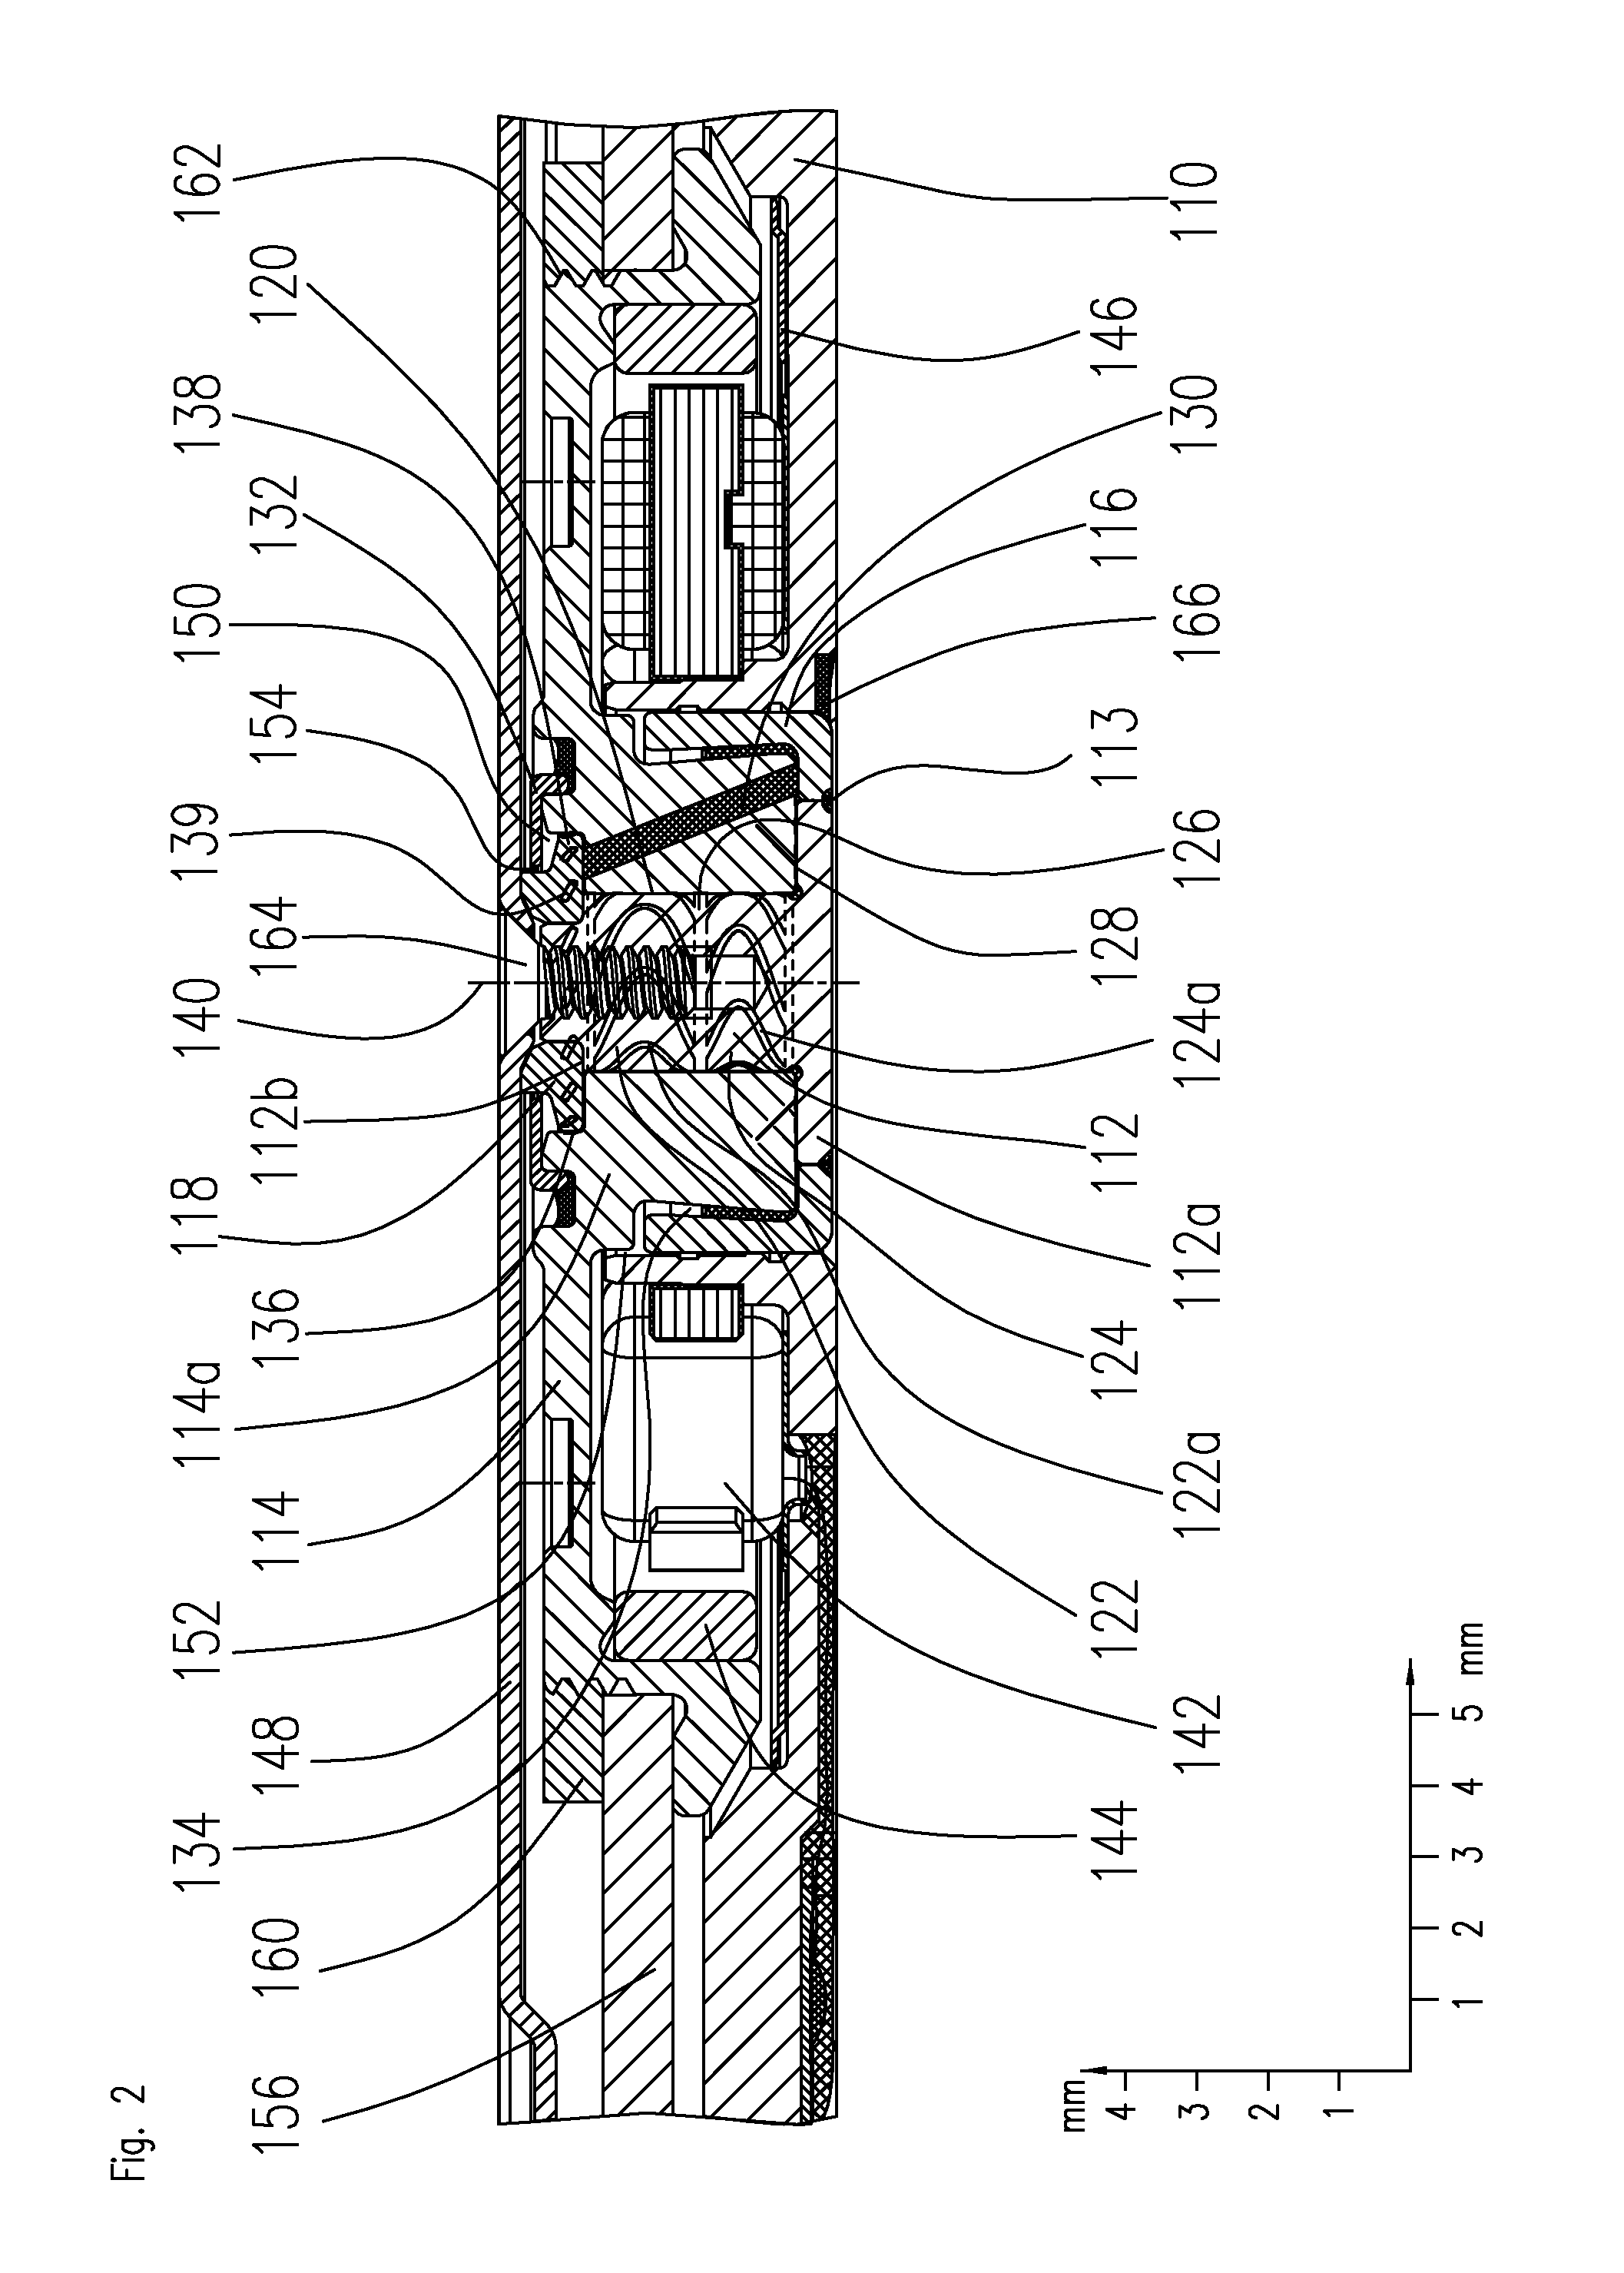 Spindle motor having a low overall height